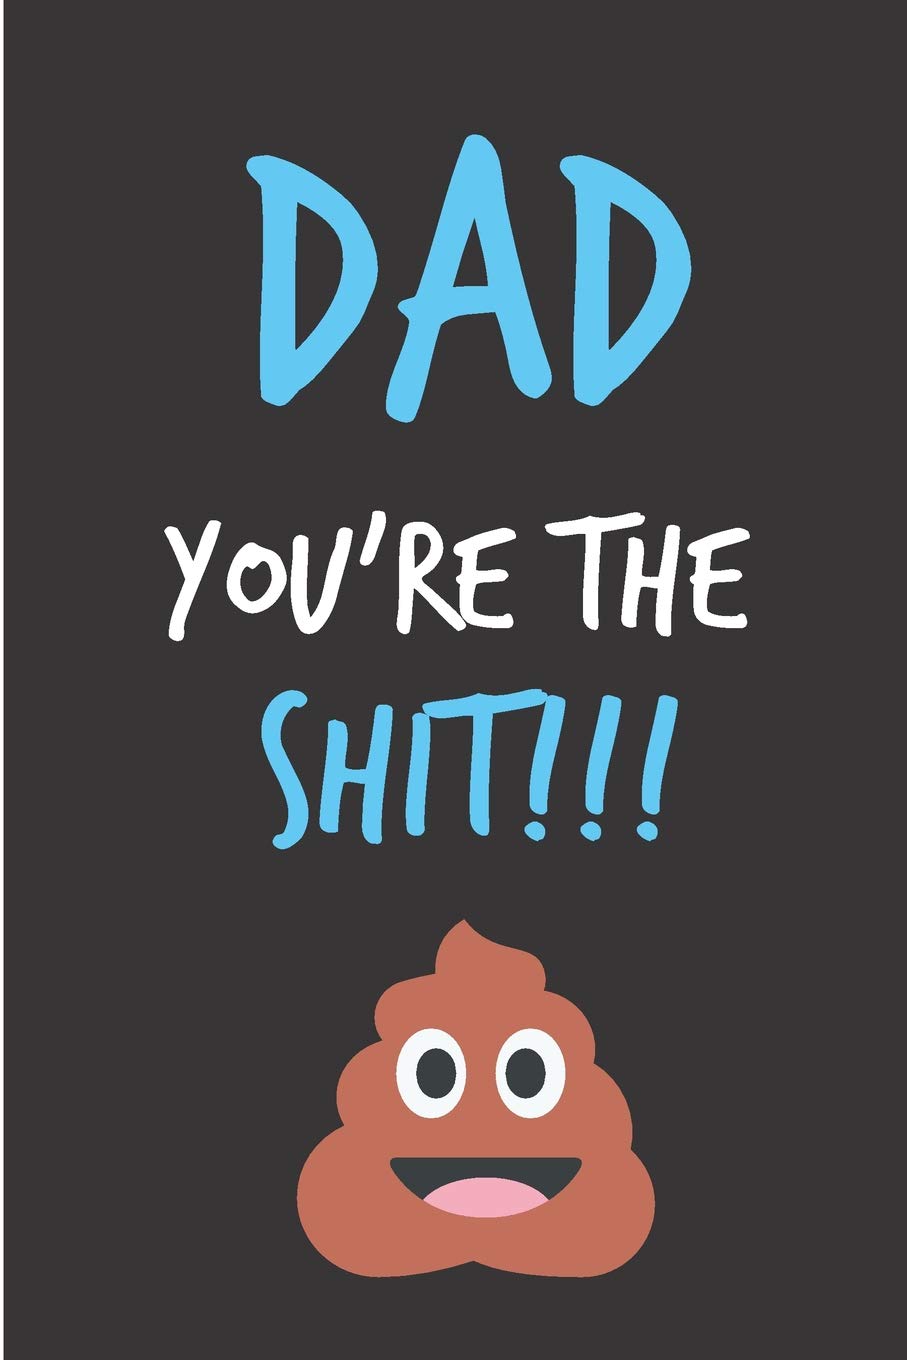 Dad you re the. Uncle clipart father figure